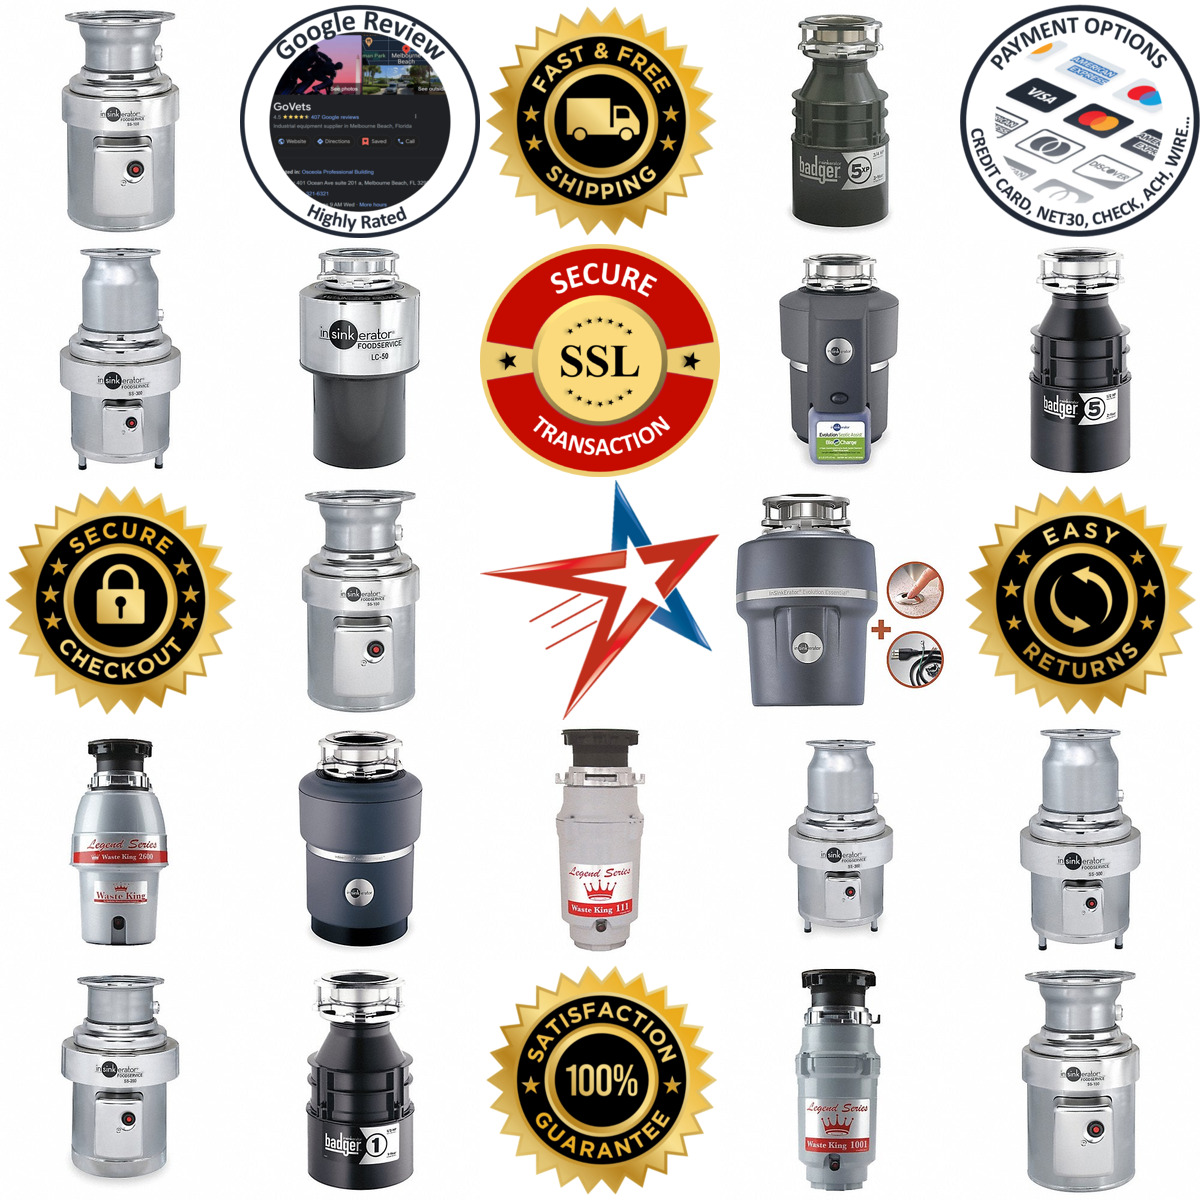 A selection of Garbage Disposals products on GoVets